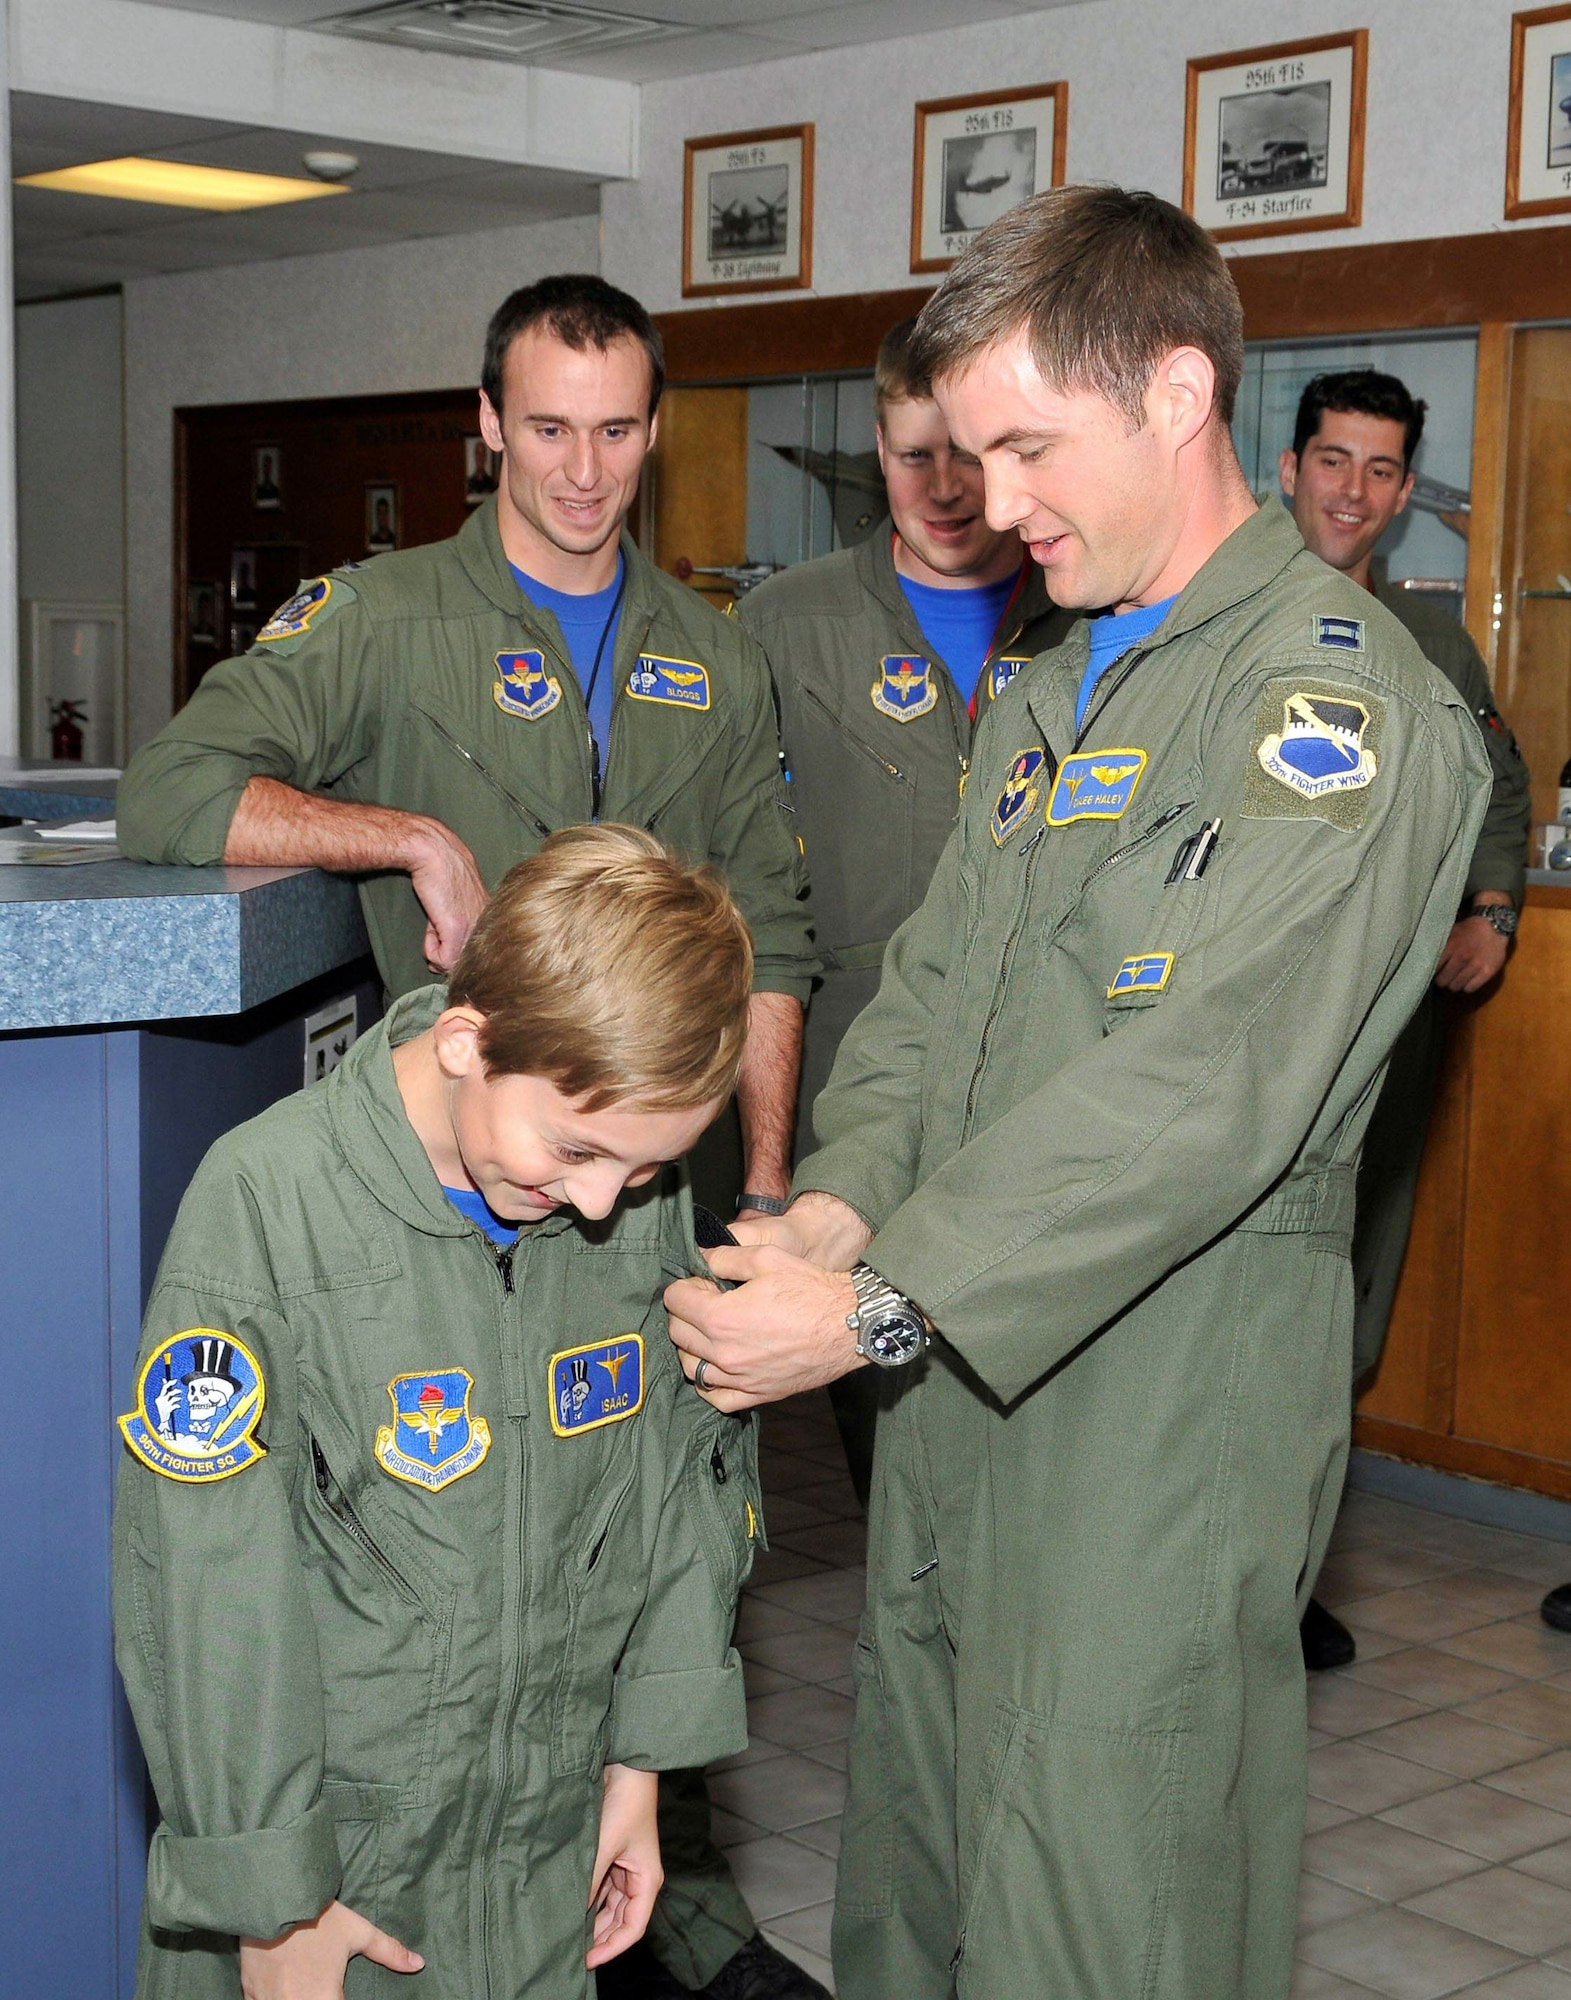 Capt. Caleb Haley presents Isaac Ezell with a 95th Fighter Squadron patch signifying the completion of his Pilot for a Day activities April 9, 2010, at Tyndall Air Force Base, Fla. Captain Haley is the 95th Fighter Squadron flight commander. (U.S. Air Force photo/Lisa Norman)